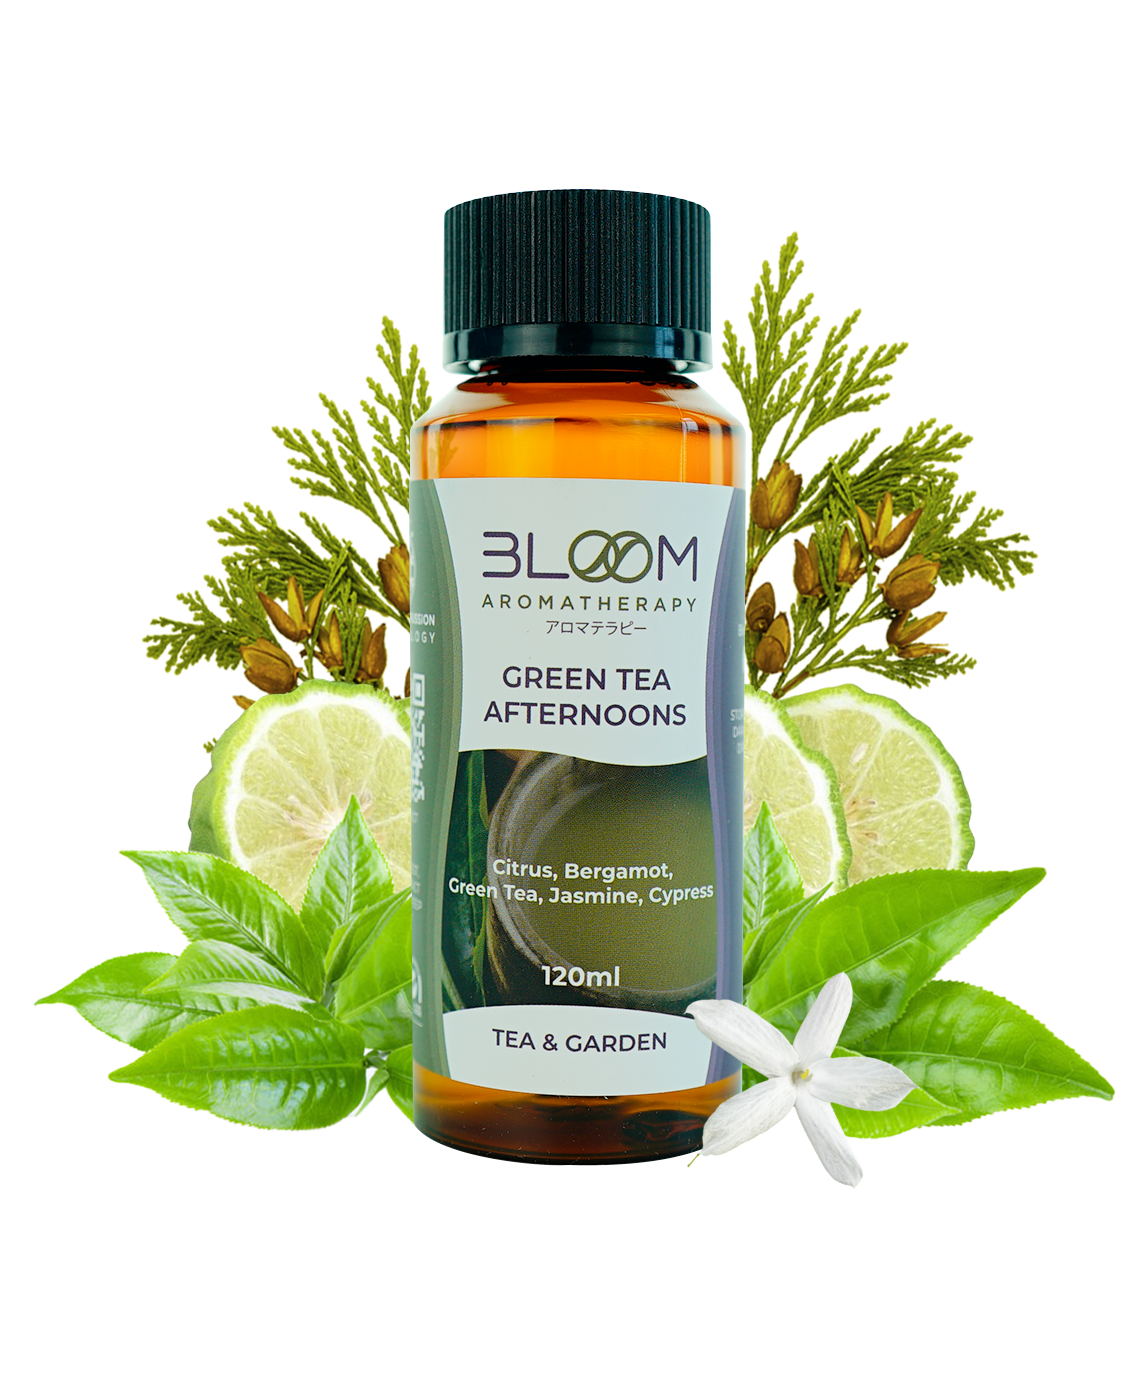 Green Tea Afternoons Aroma Oil